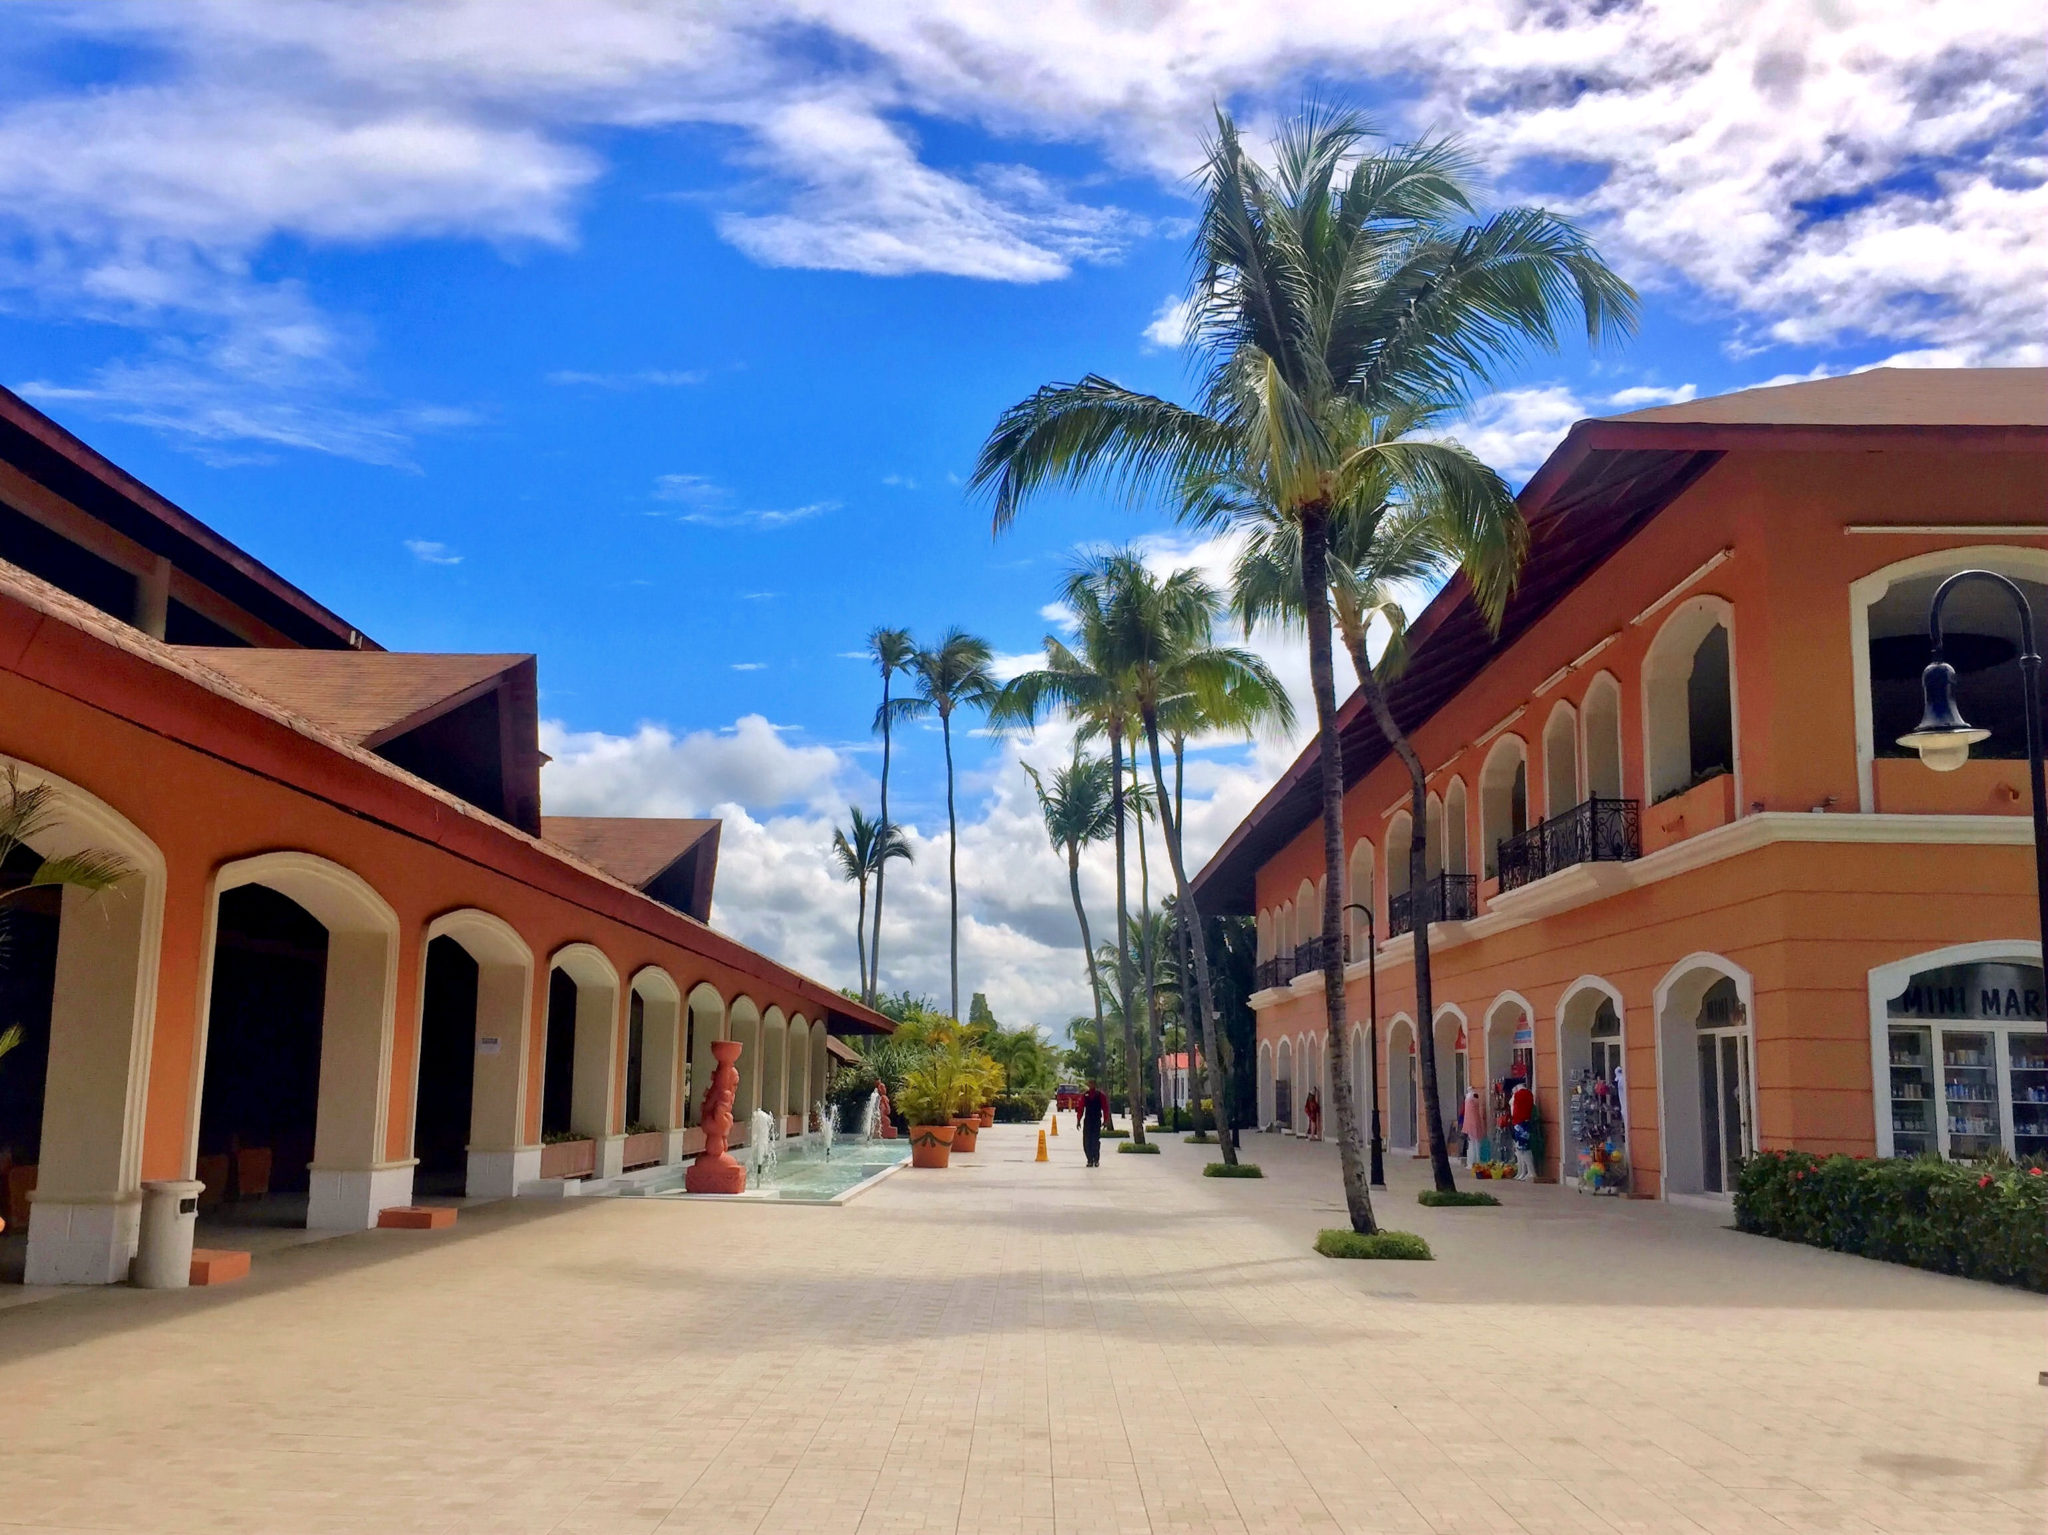 The Caribbean Street at Majestic Colonial Punta Cana